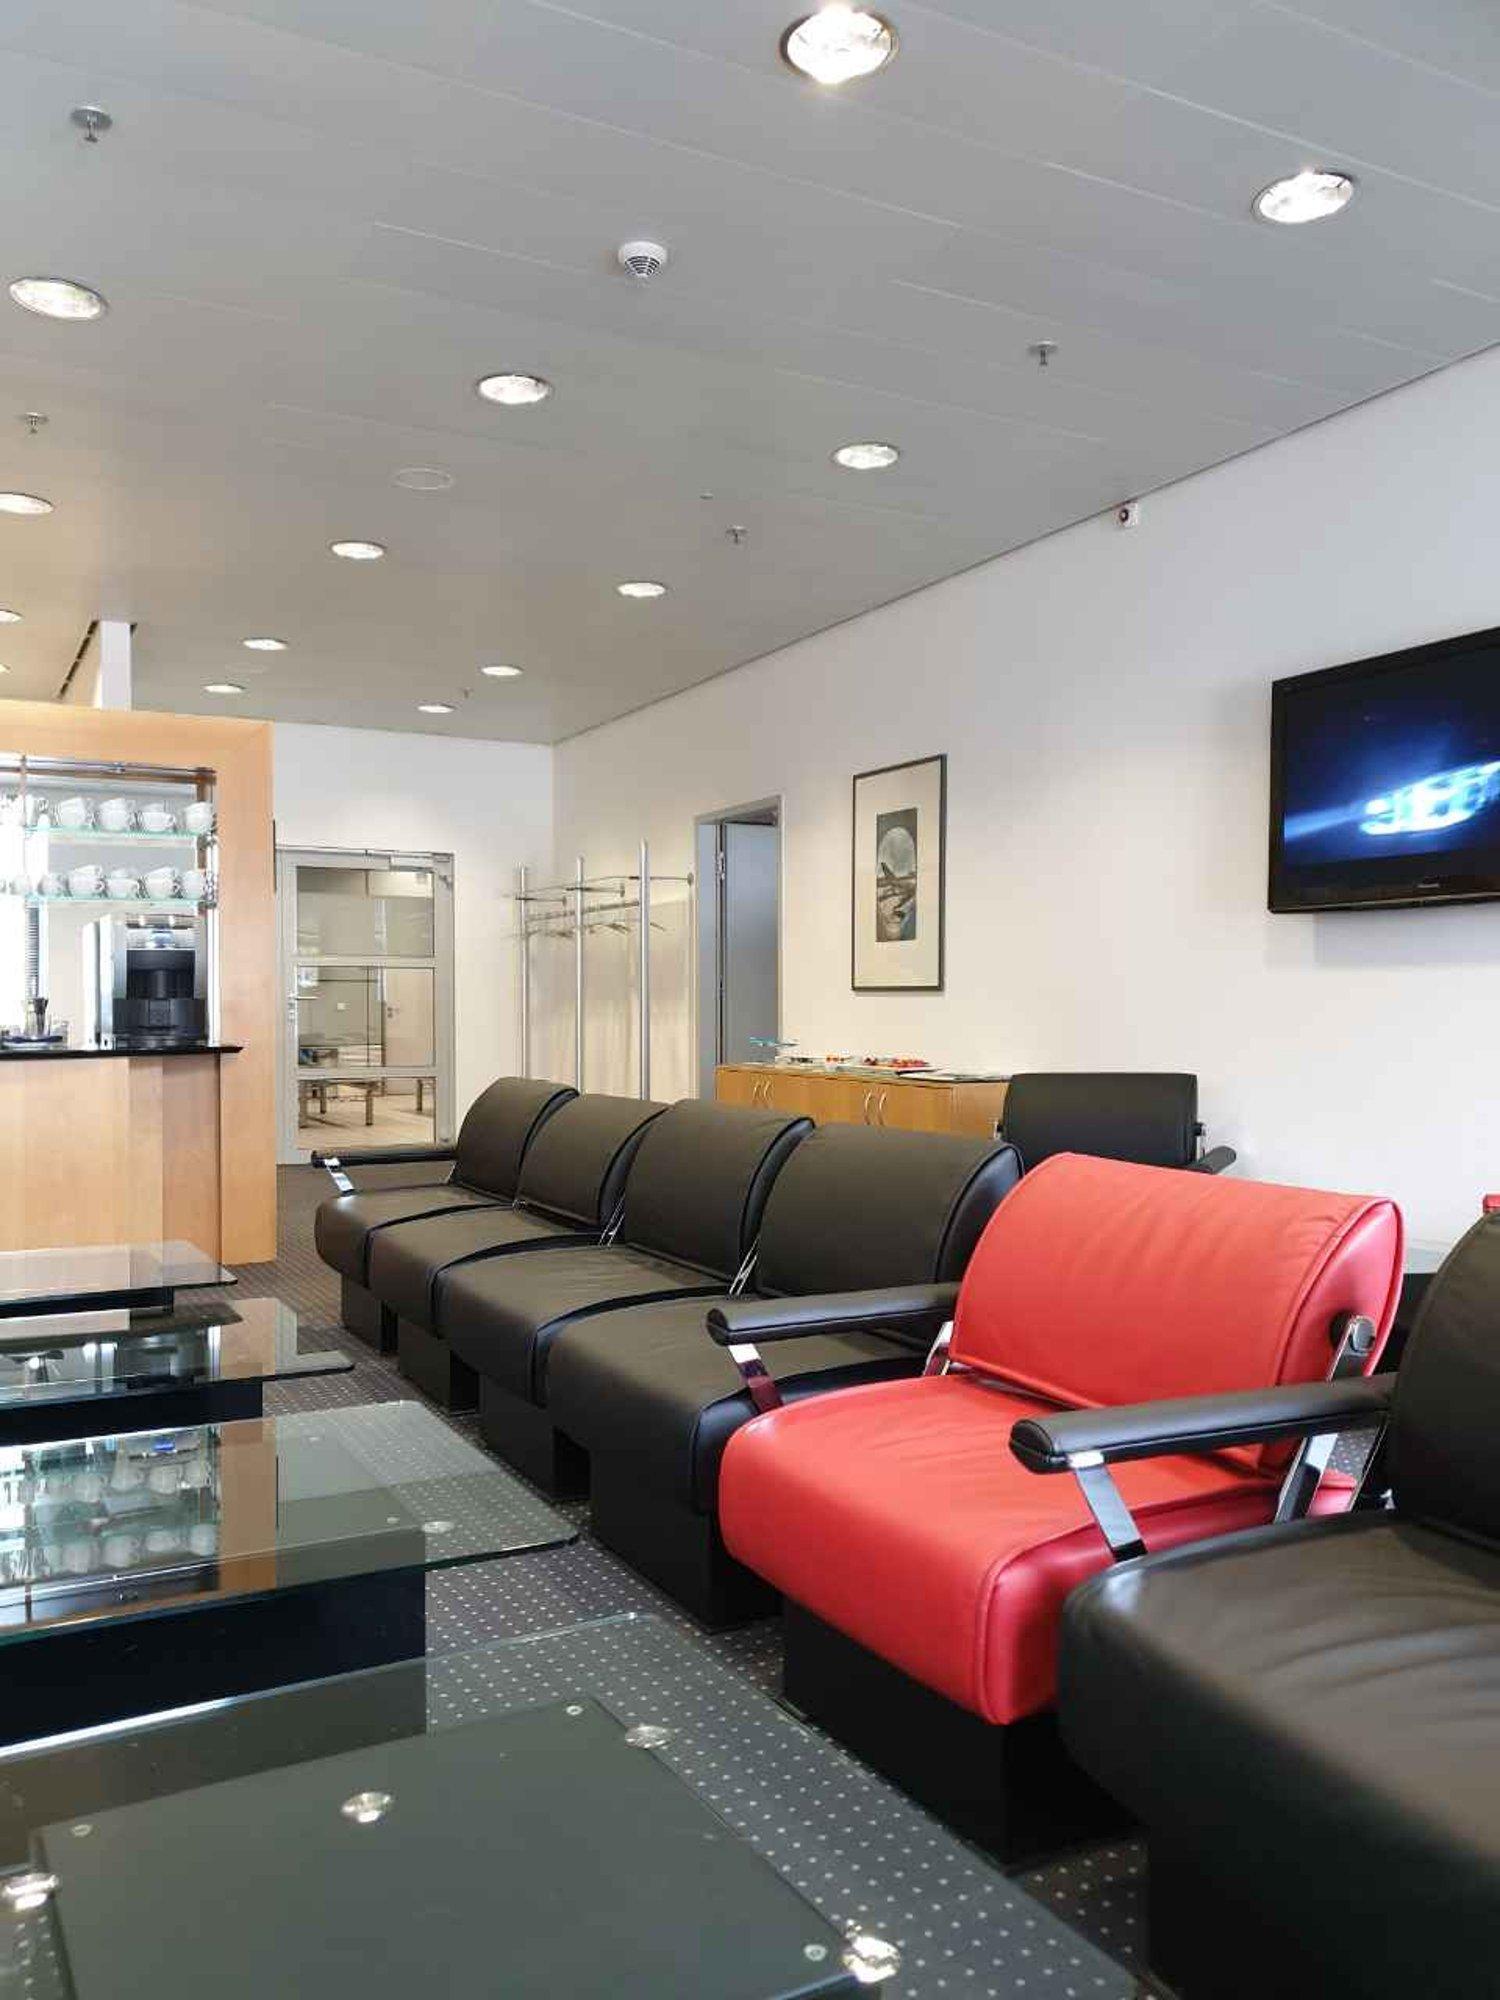 Airport VIP Lounge image 3 of 4